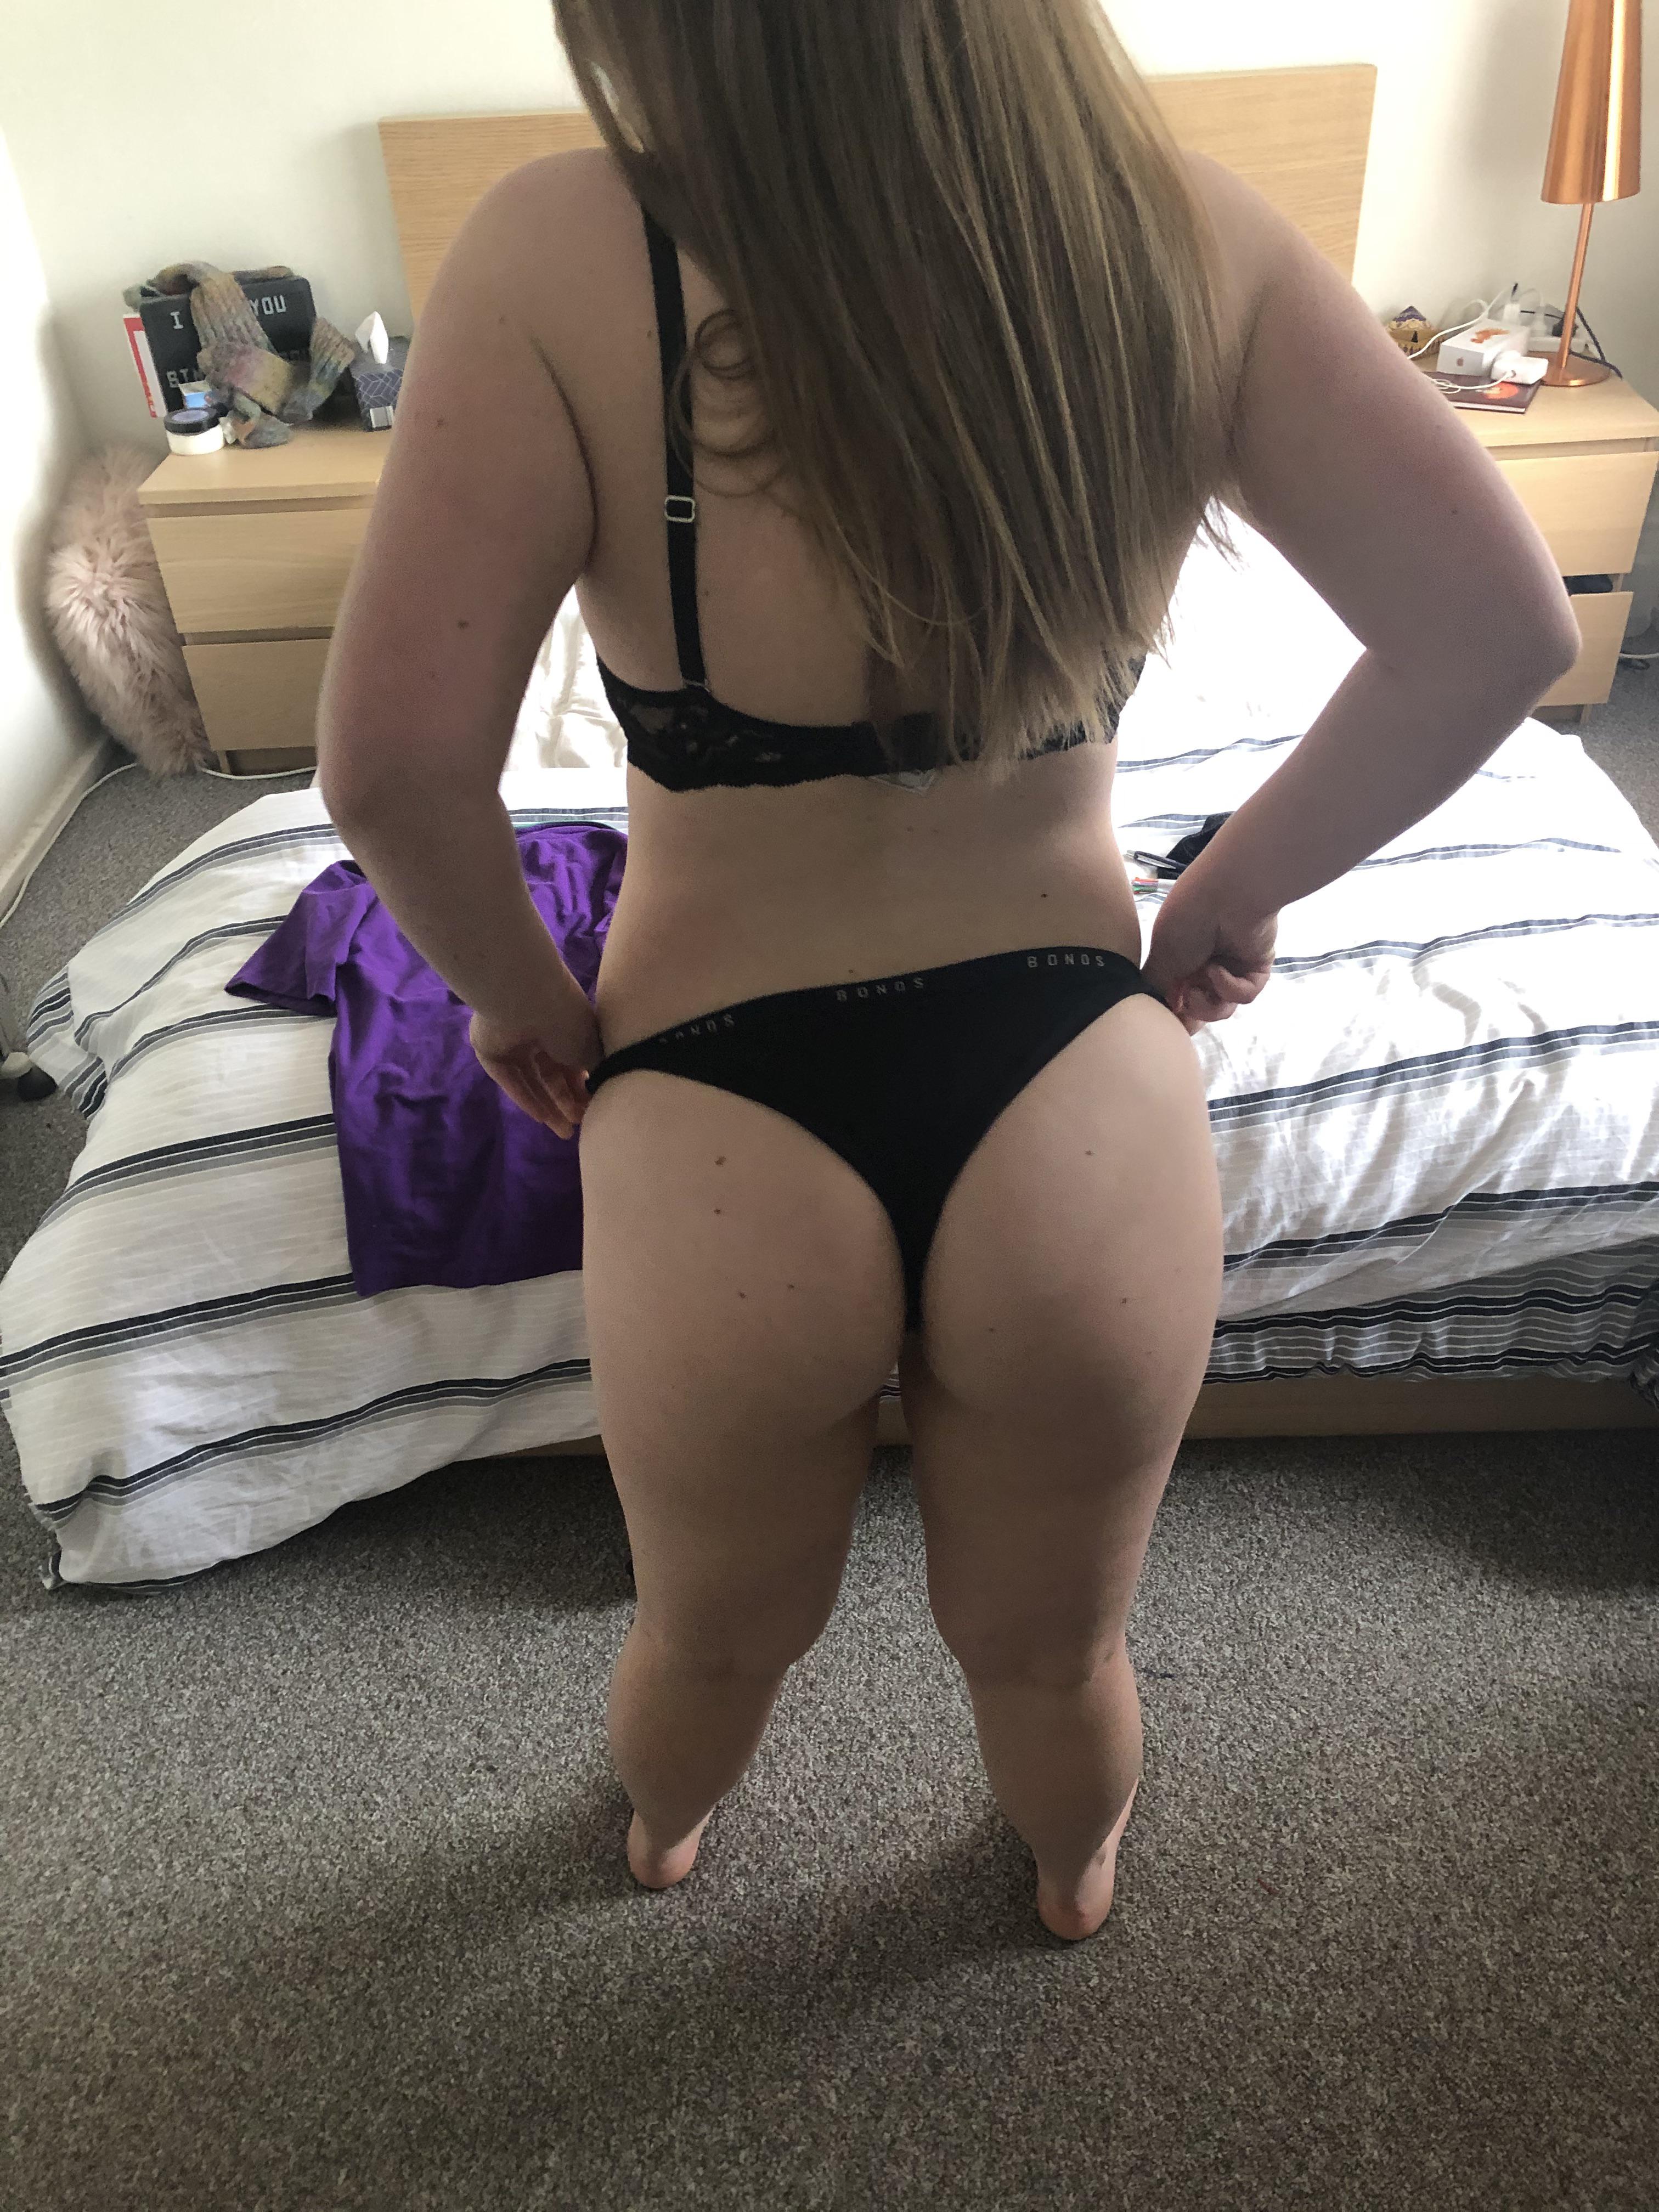 Is she fuckable? Tell me why and how you’d it?